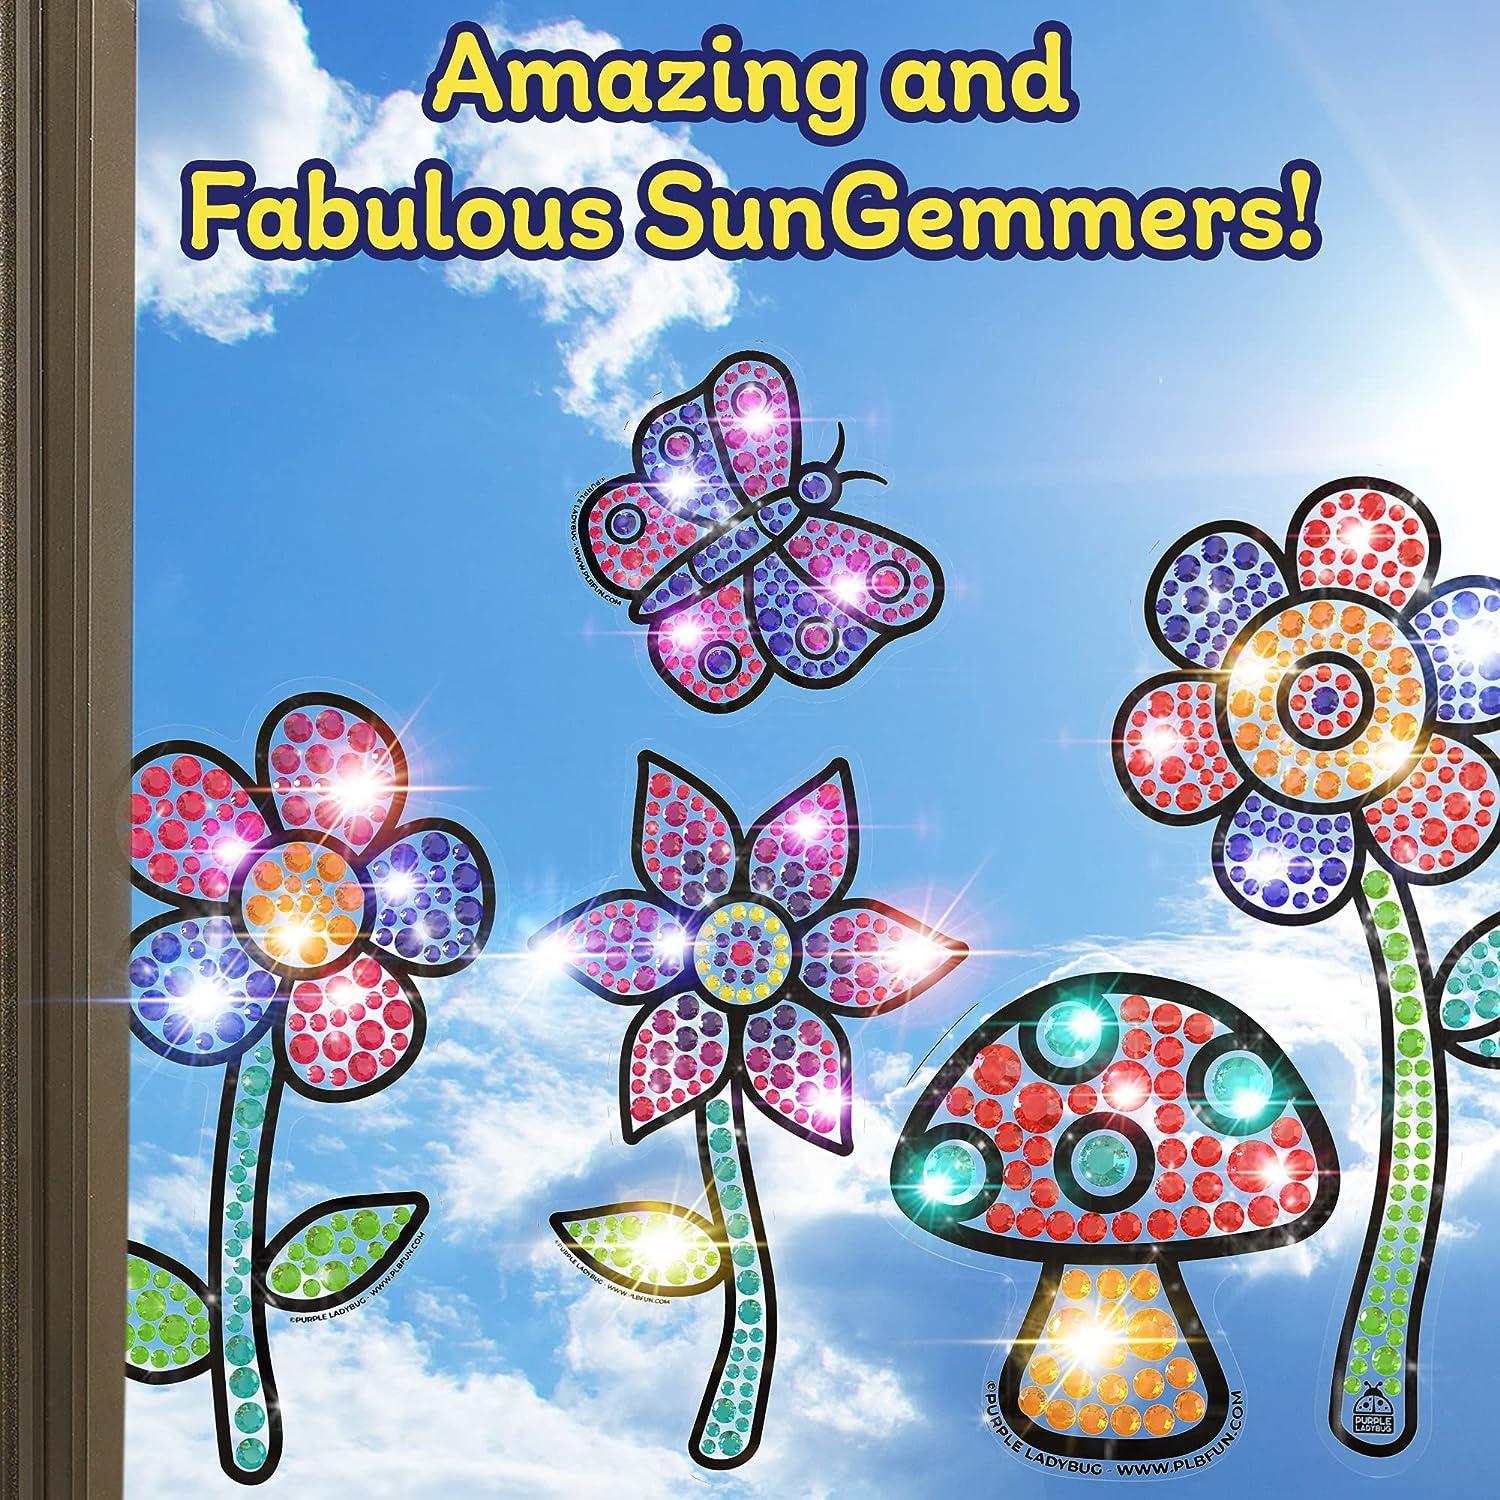 WEKEY Window Art Suncatcher Kits for Kids,Diamond Painting Kits for  Kids,Gem Art Crafts for Girls Ages 8-12, Birthday Kids Crafts Gifts for  Girls